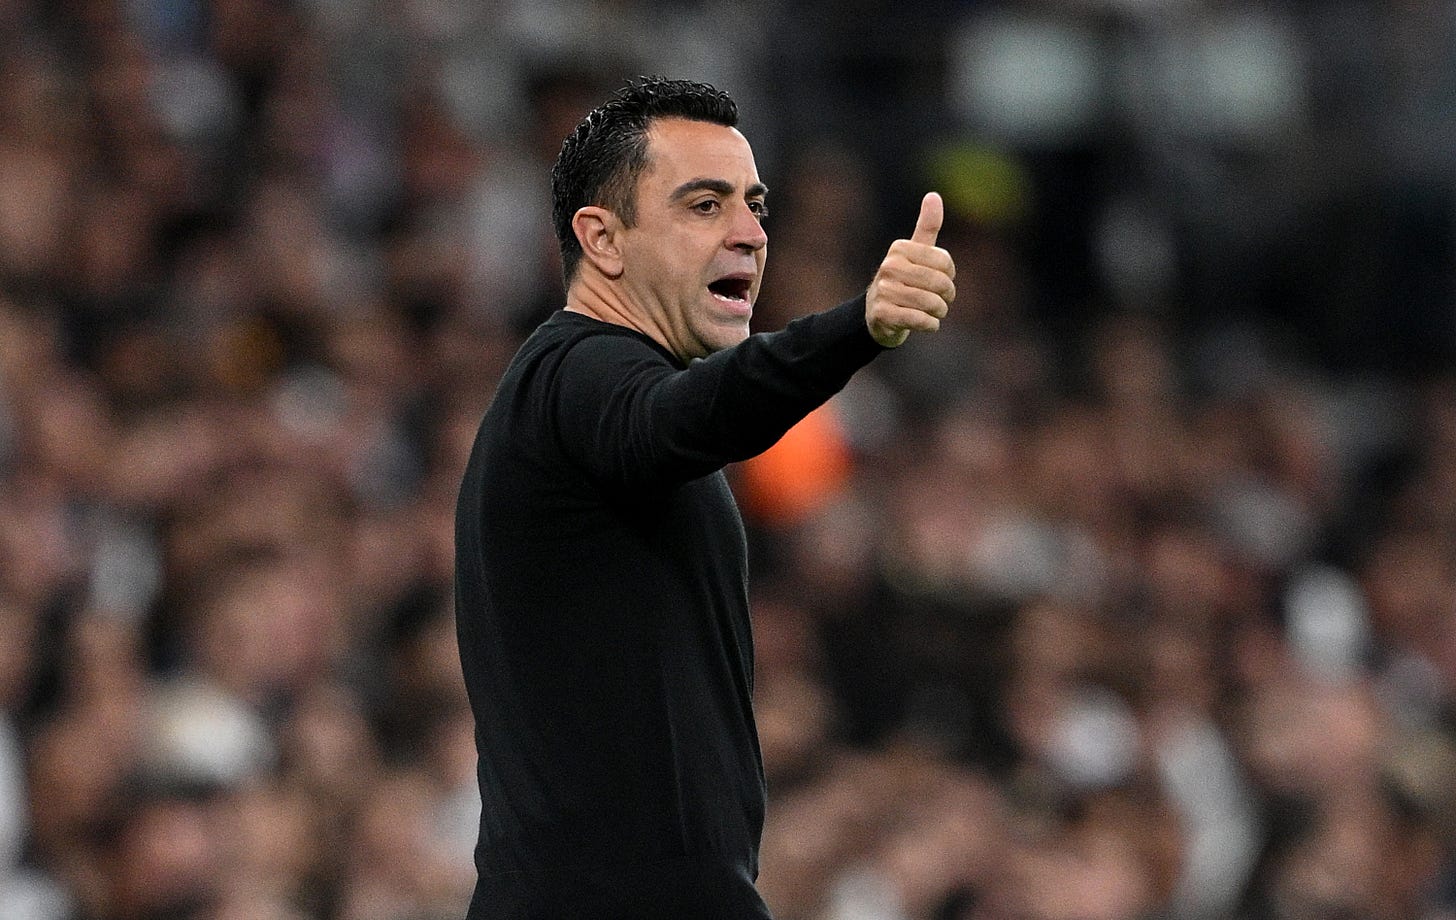 Barcelona boss Xavi Hernandez pictured with his thumb up